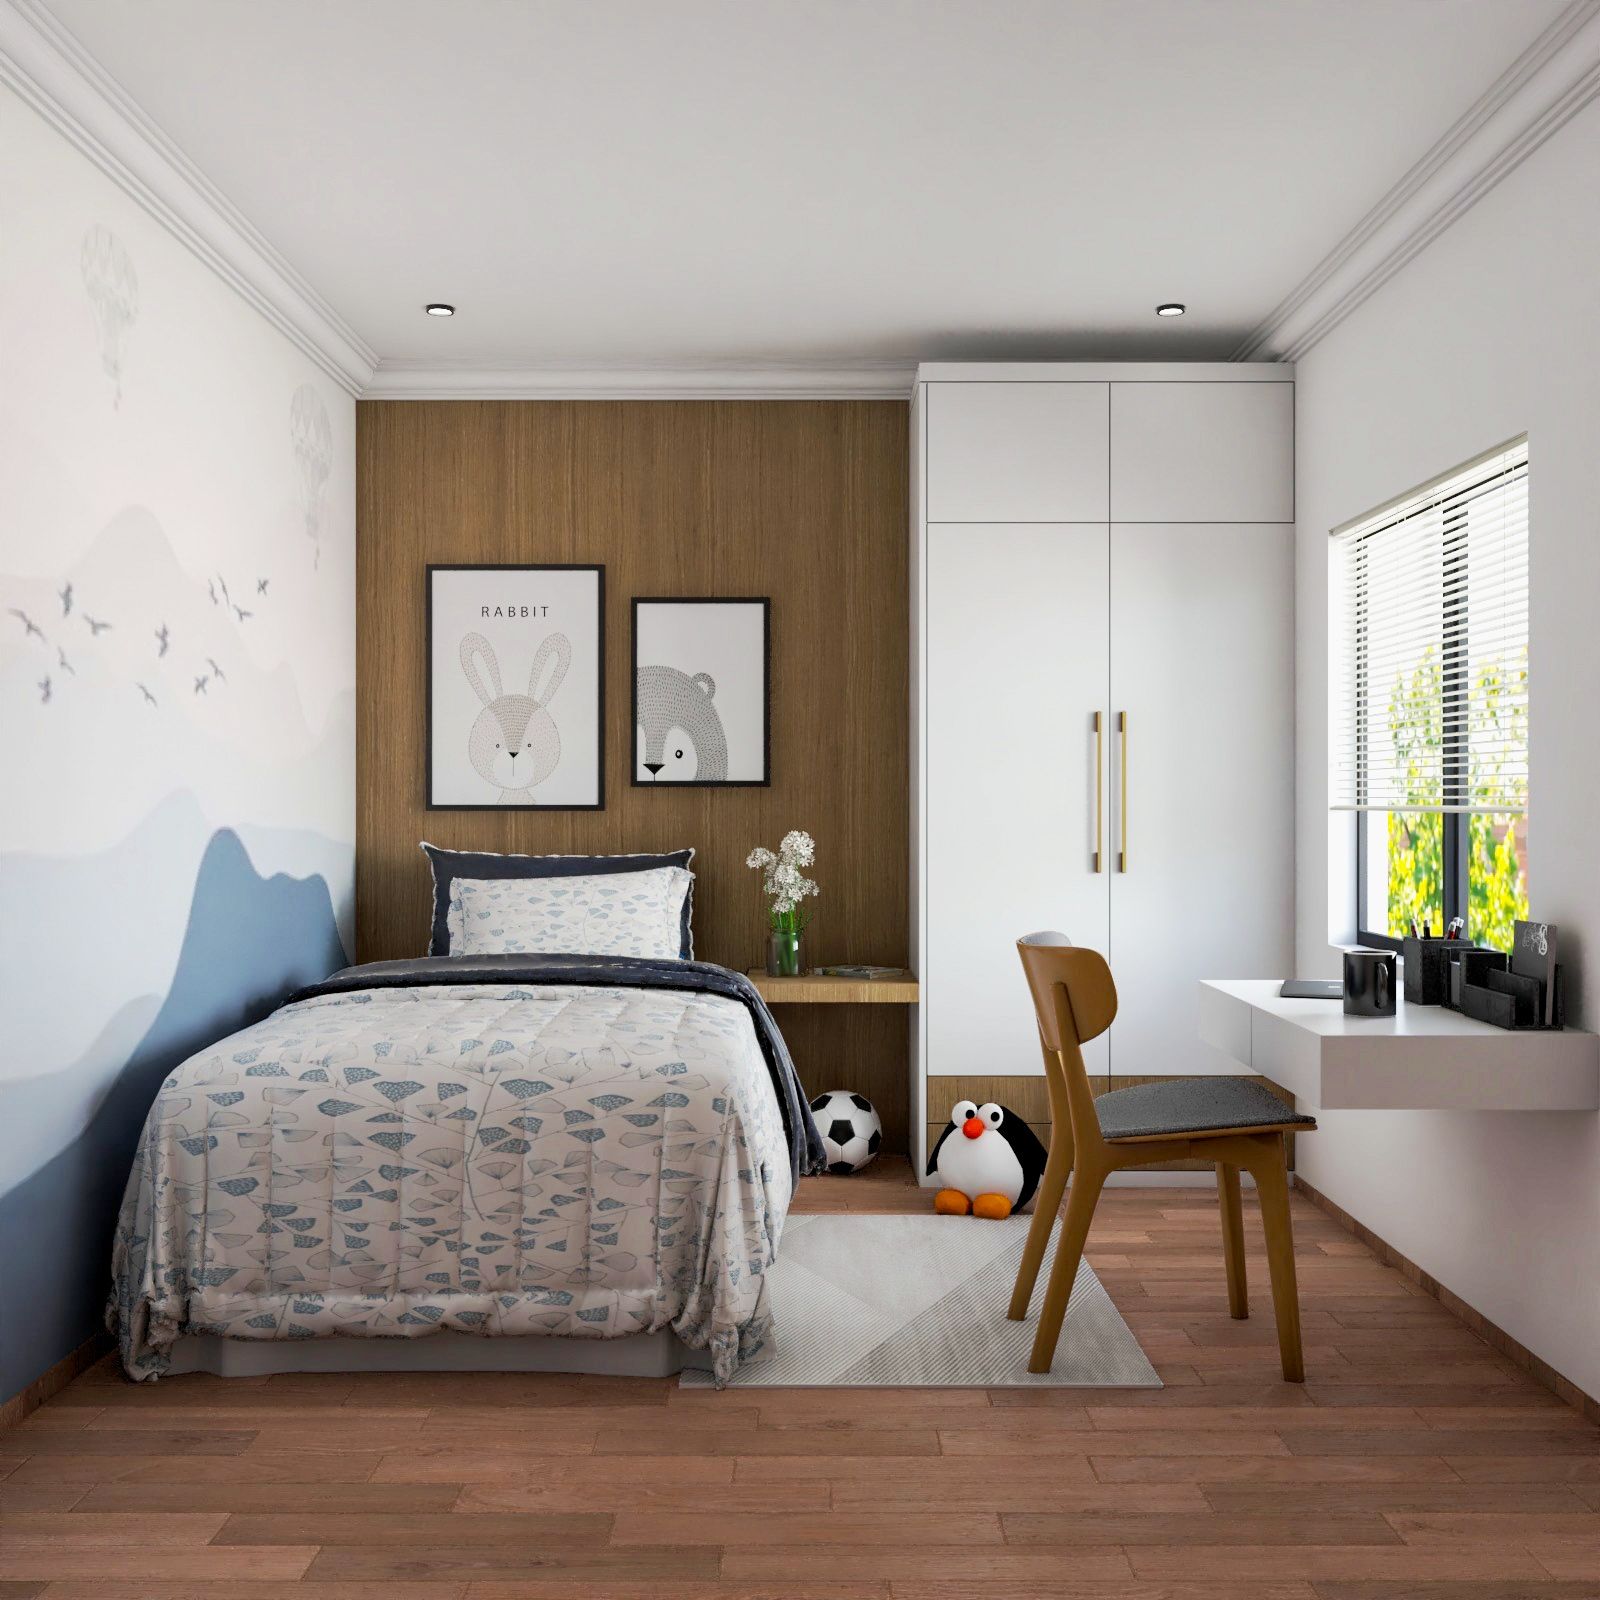 Contemporary Wall Design With Wooden Accent Wall And Nature-Themed Wallpaper